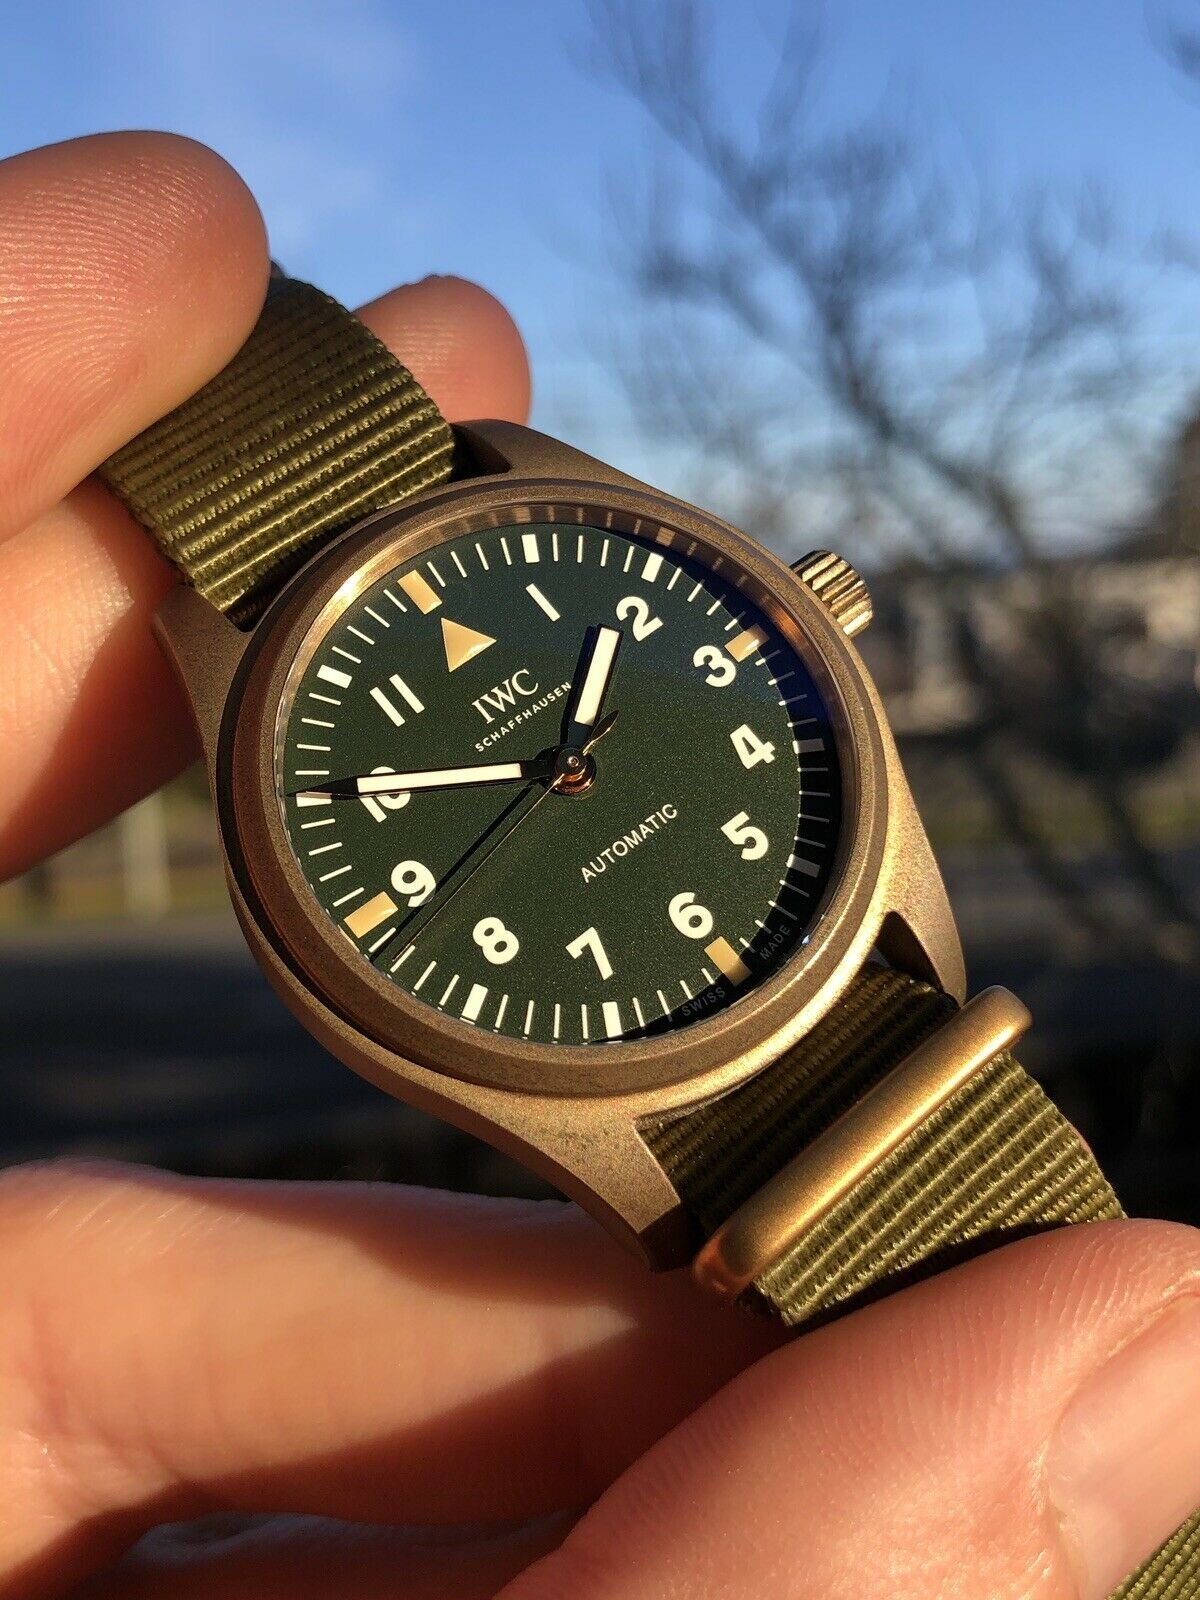 IWC_Pilot_27s_Watch_Automatic_36mm_Special_Edition_for_The_Rake_and_Revolution_Watch_Vault_02.jpg